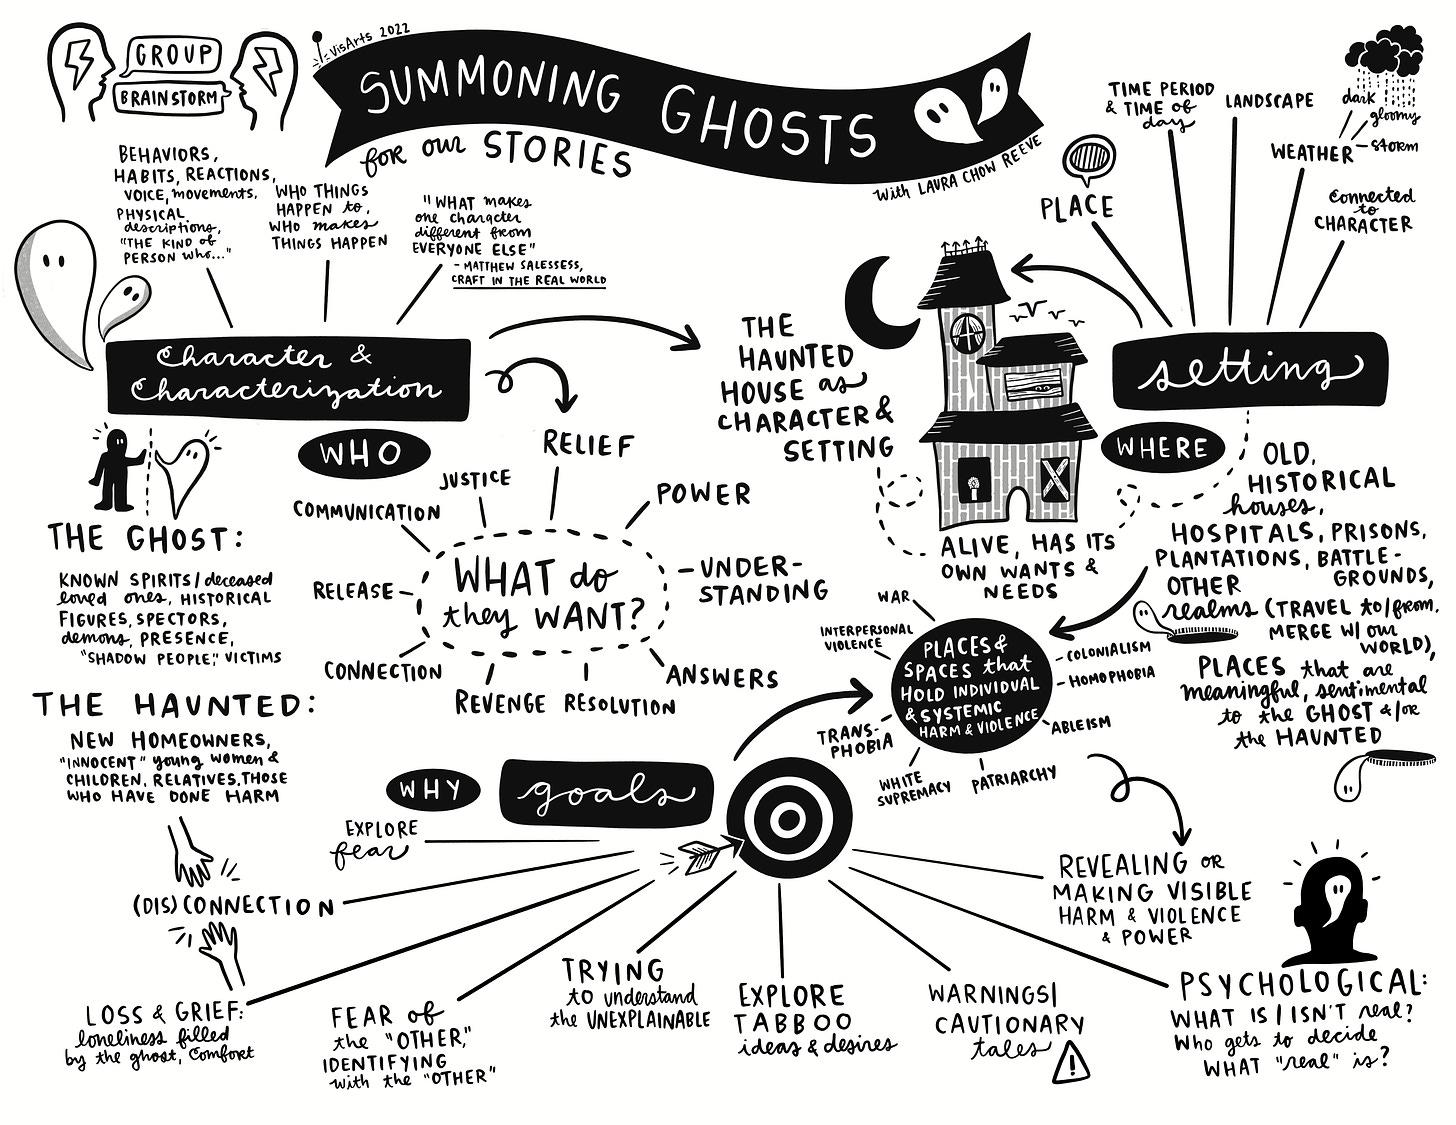 Illustrated notes on the who (characterization), where (setting), and why (goals) of ghost story writing